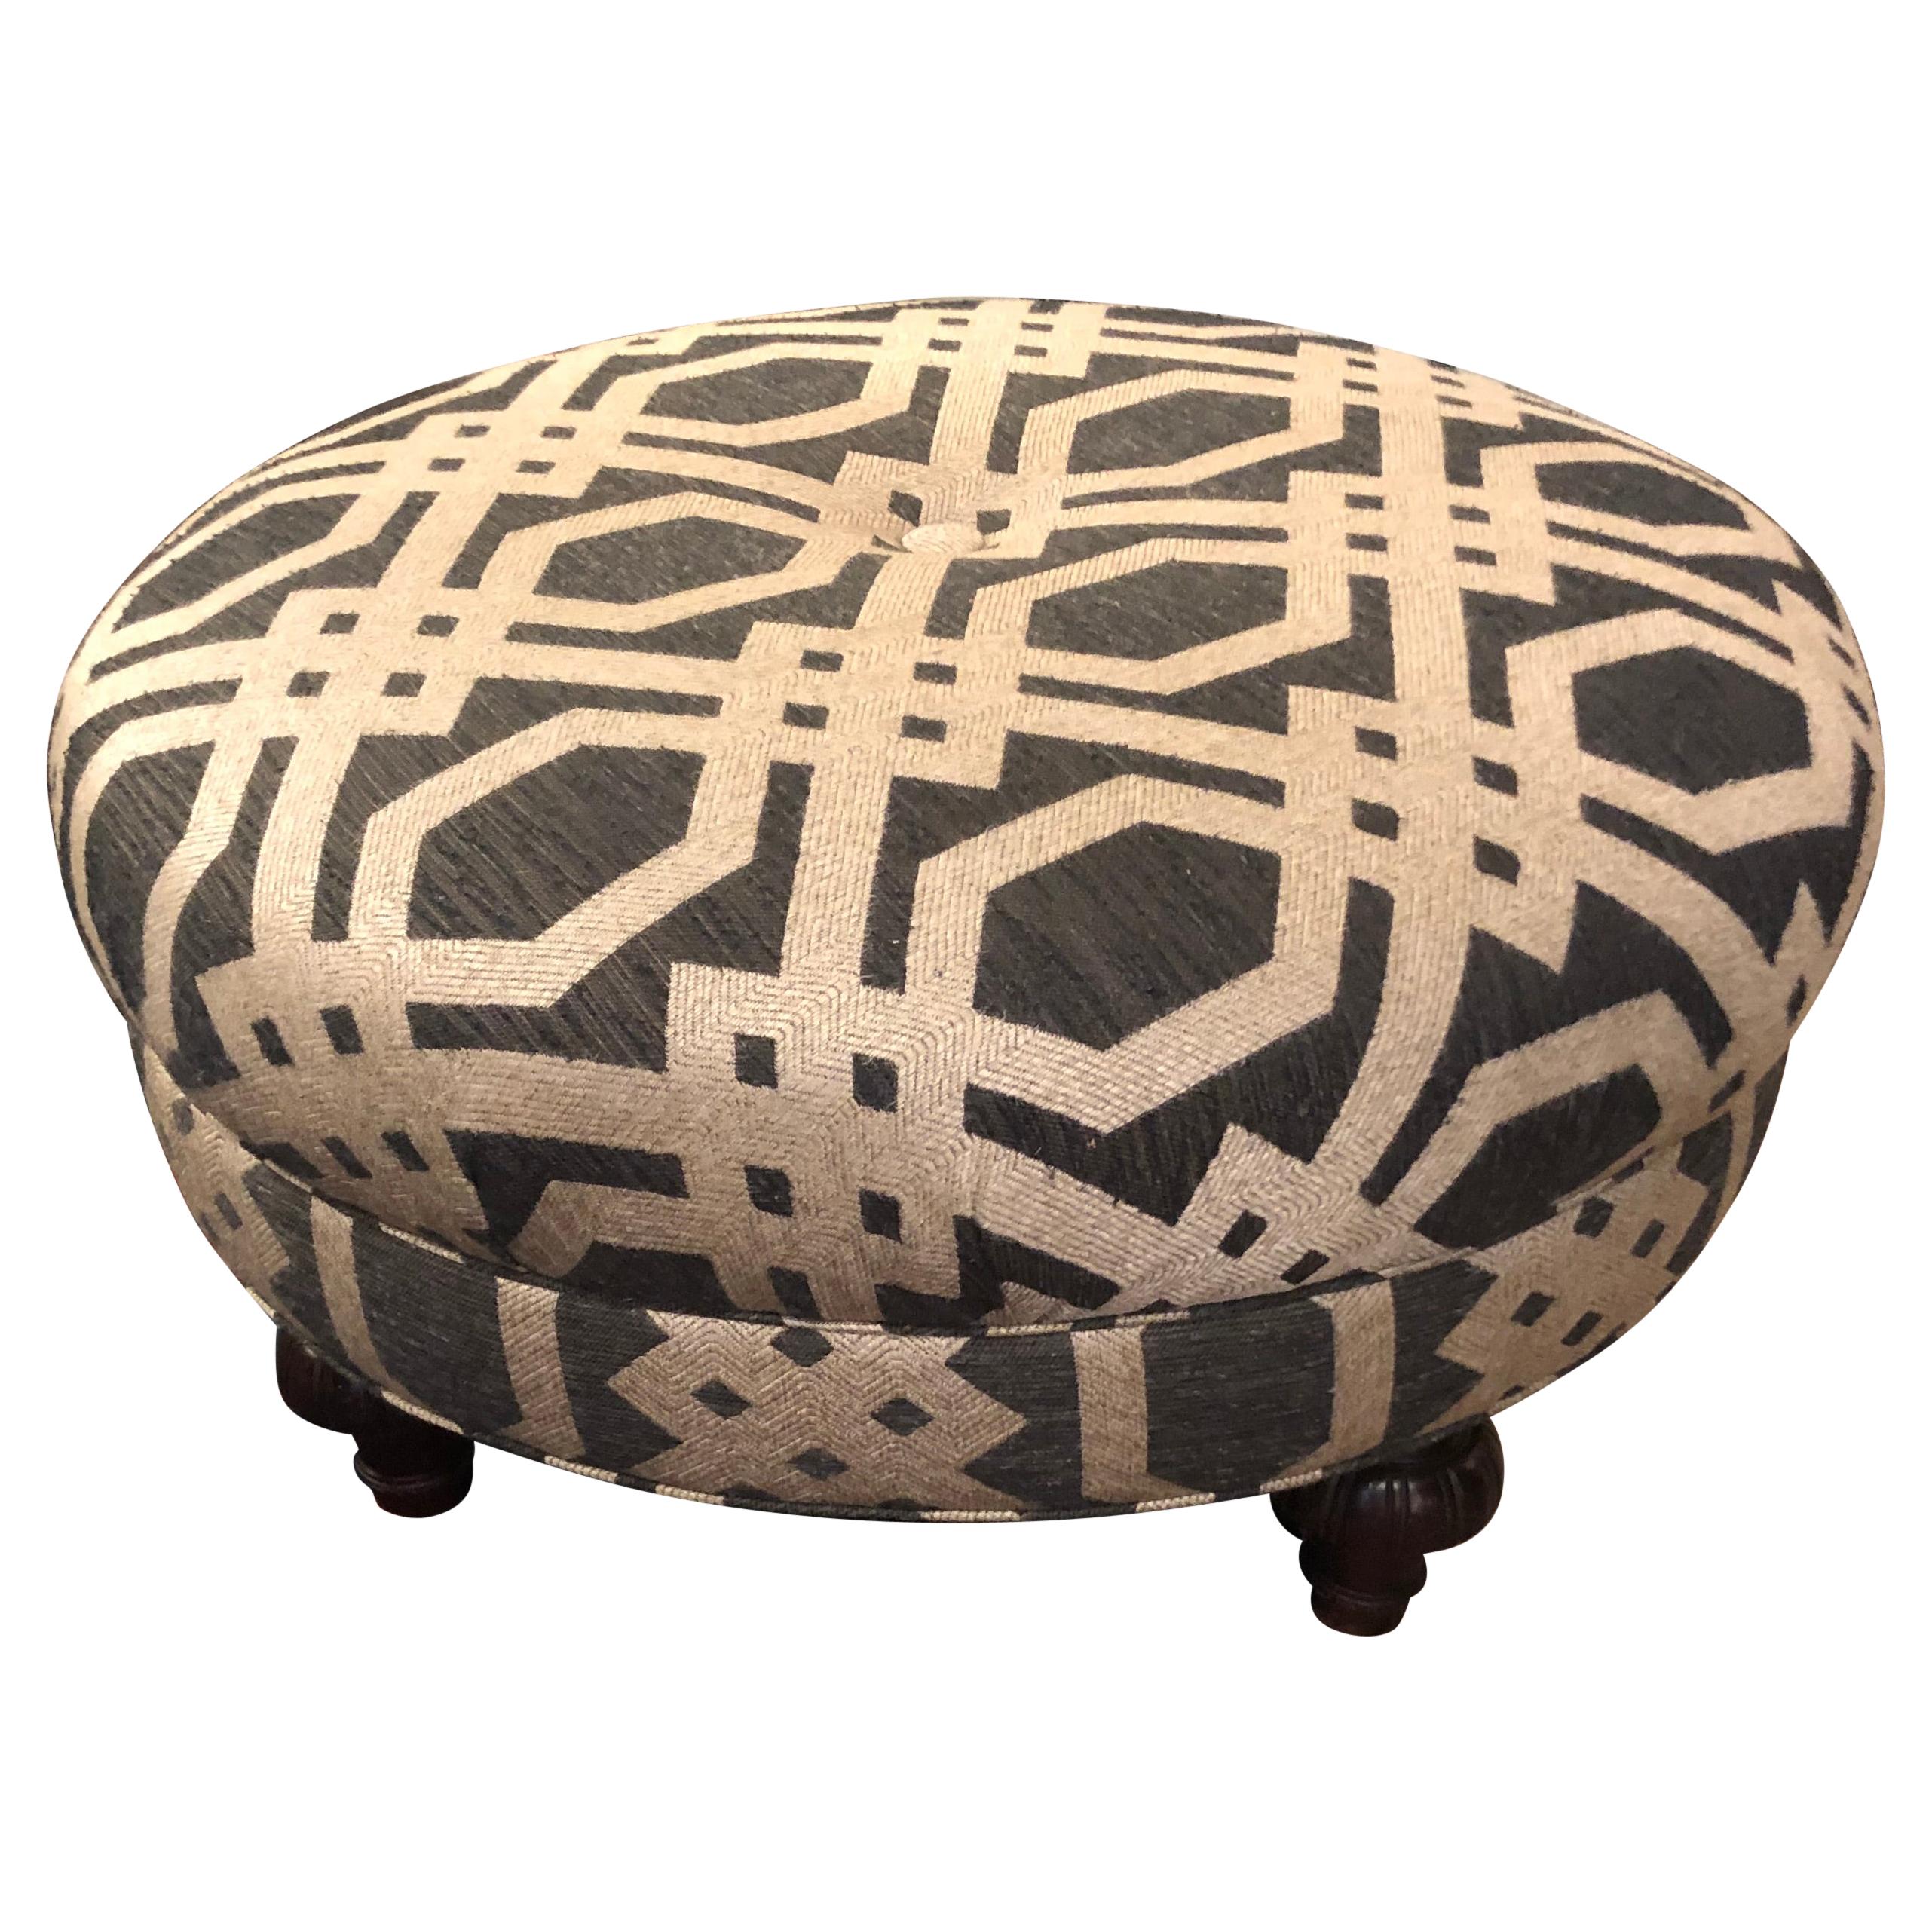 Handsome Large Round Upholstered Ottoman in Striking Lattice Motife Fabric